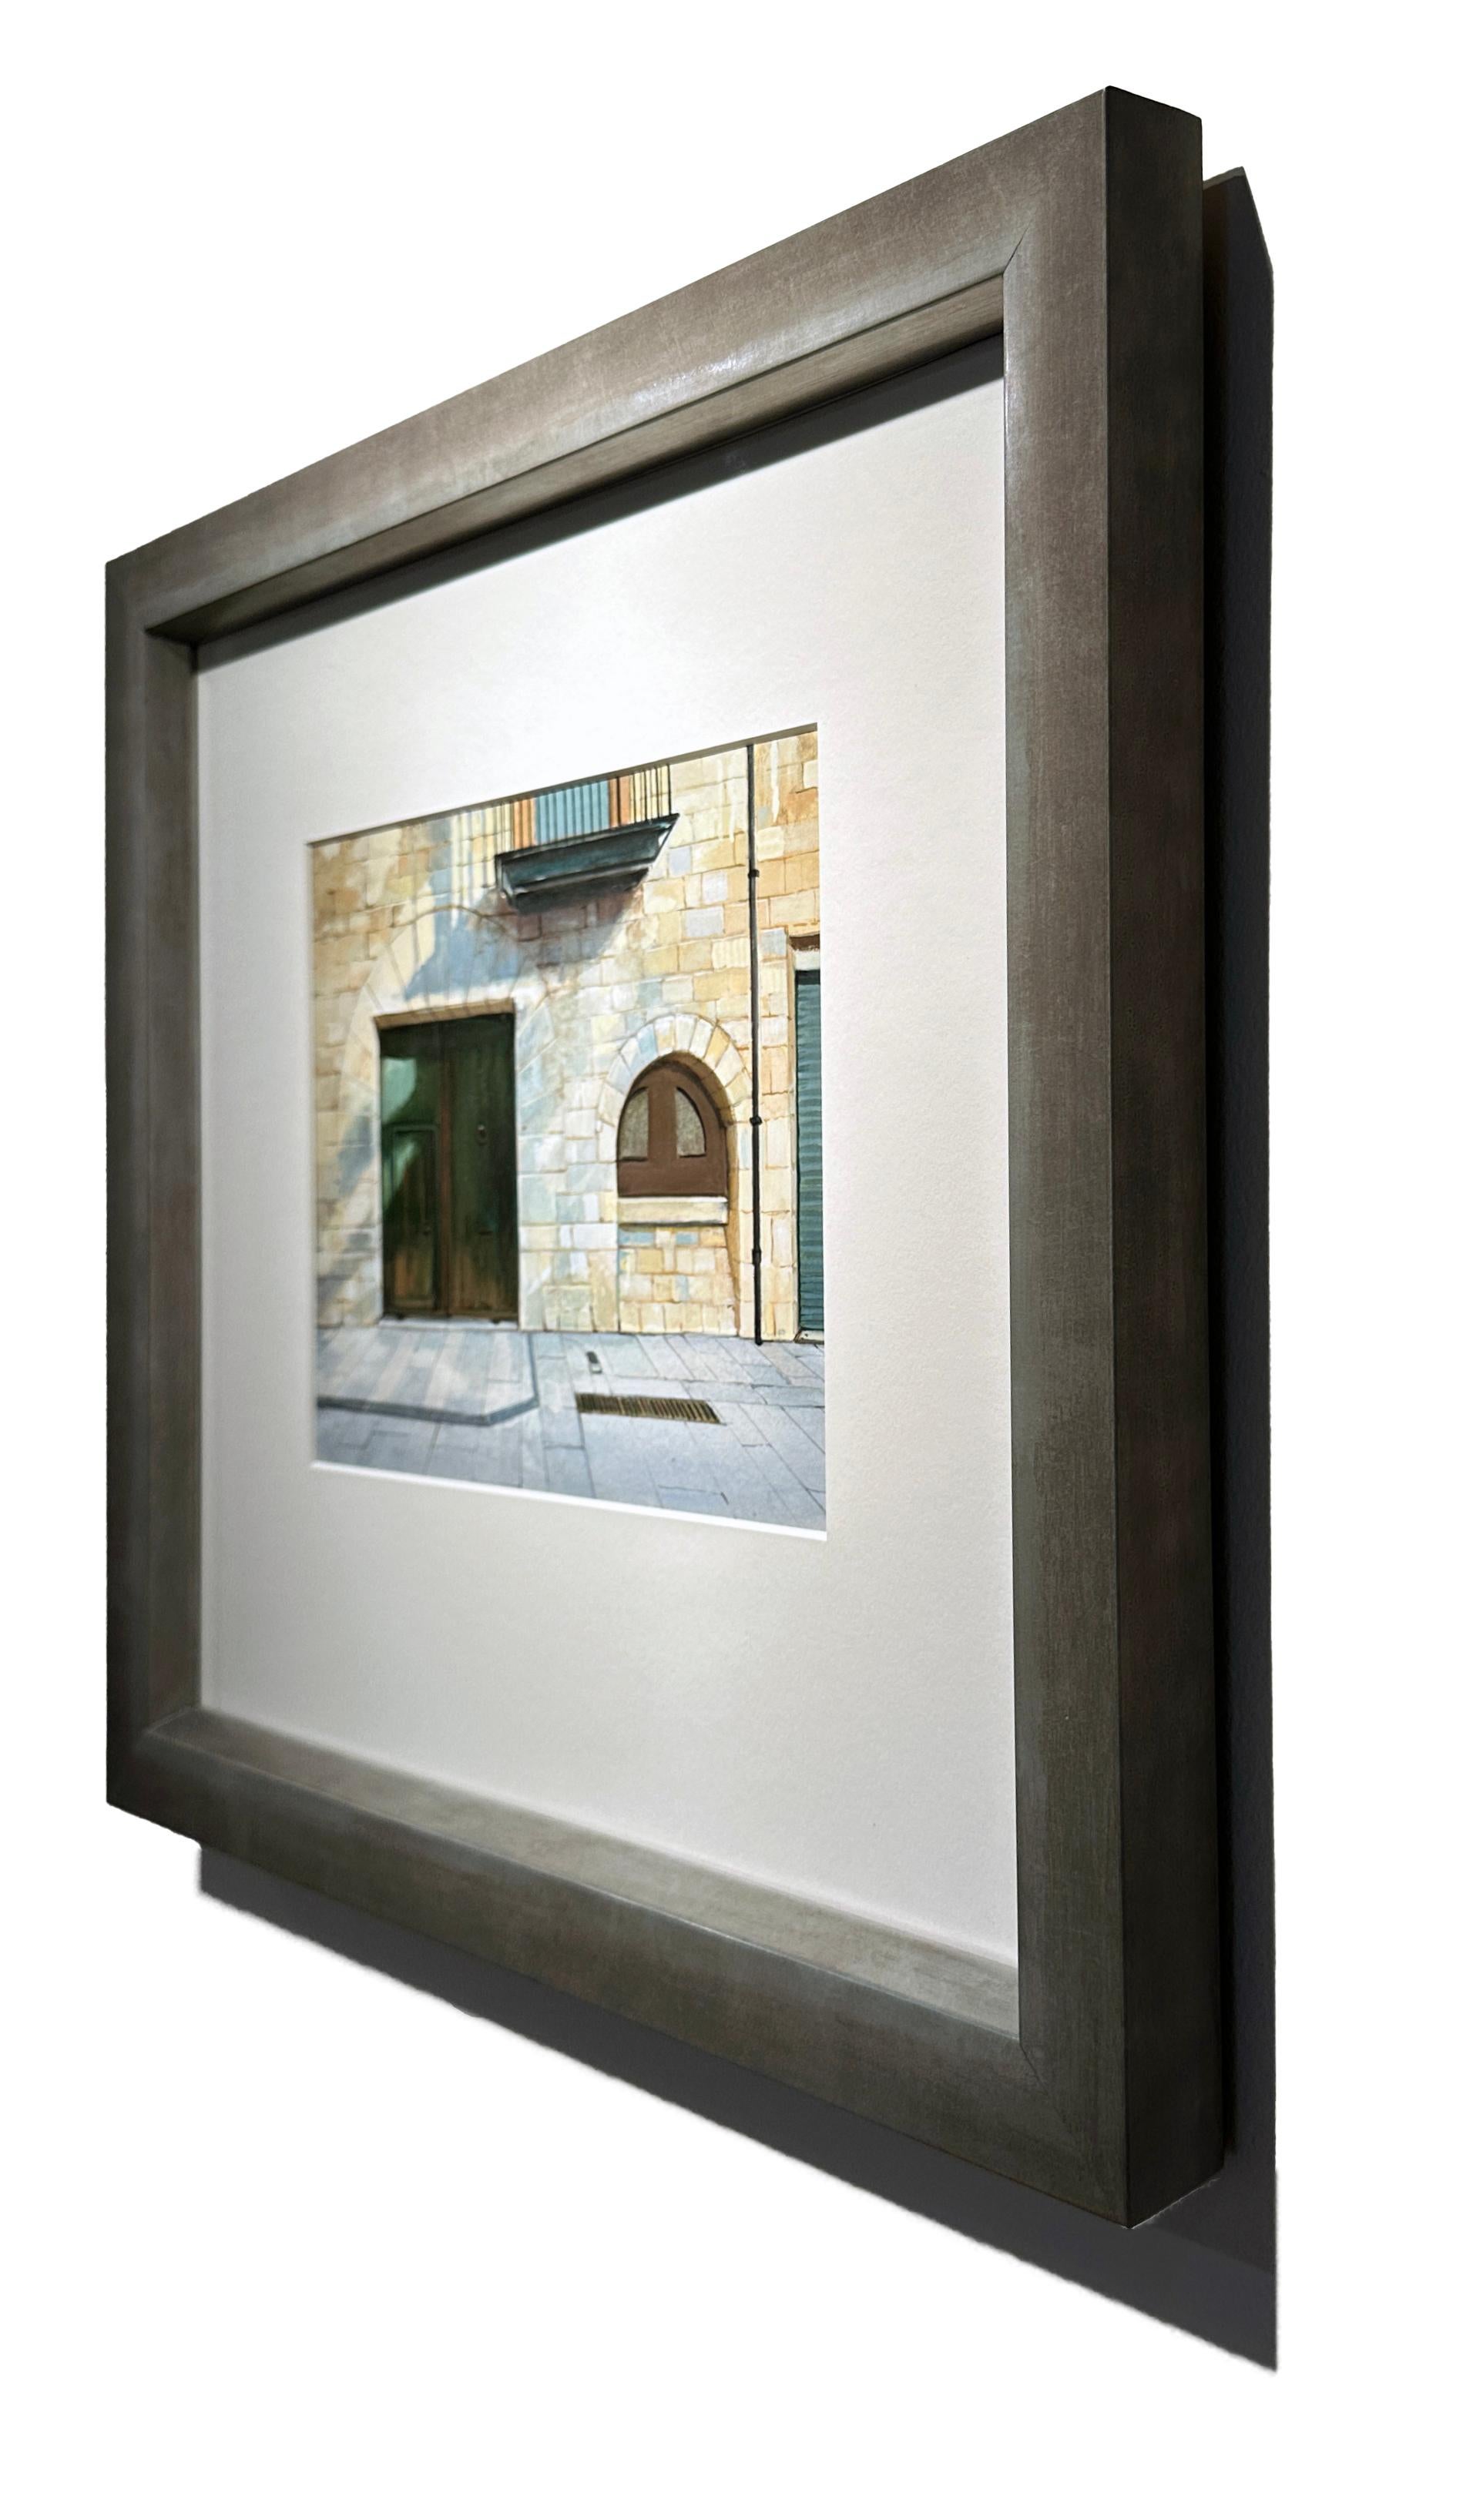 Aquardar (Waiting Expectantly) - Architectural Imagery, Doorways, Dappled Light For Sale 3